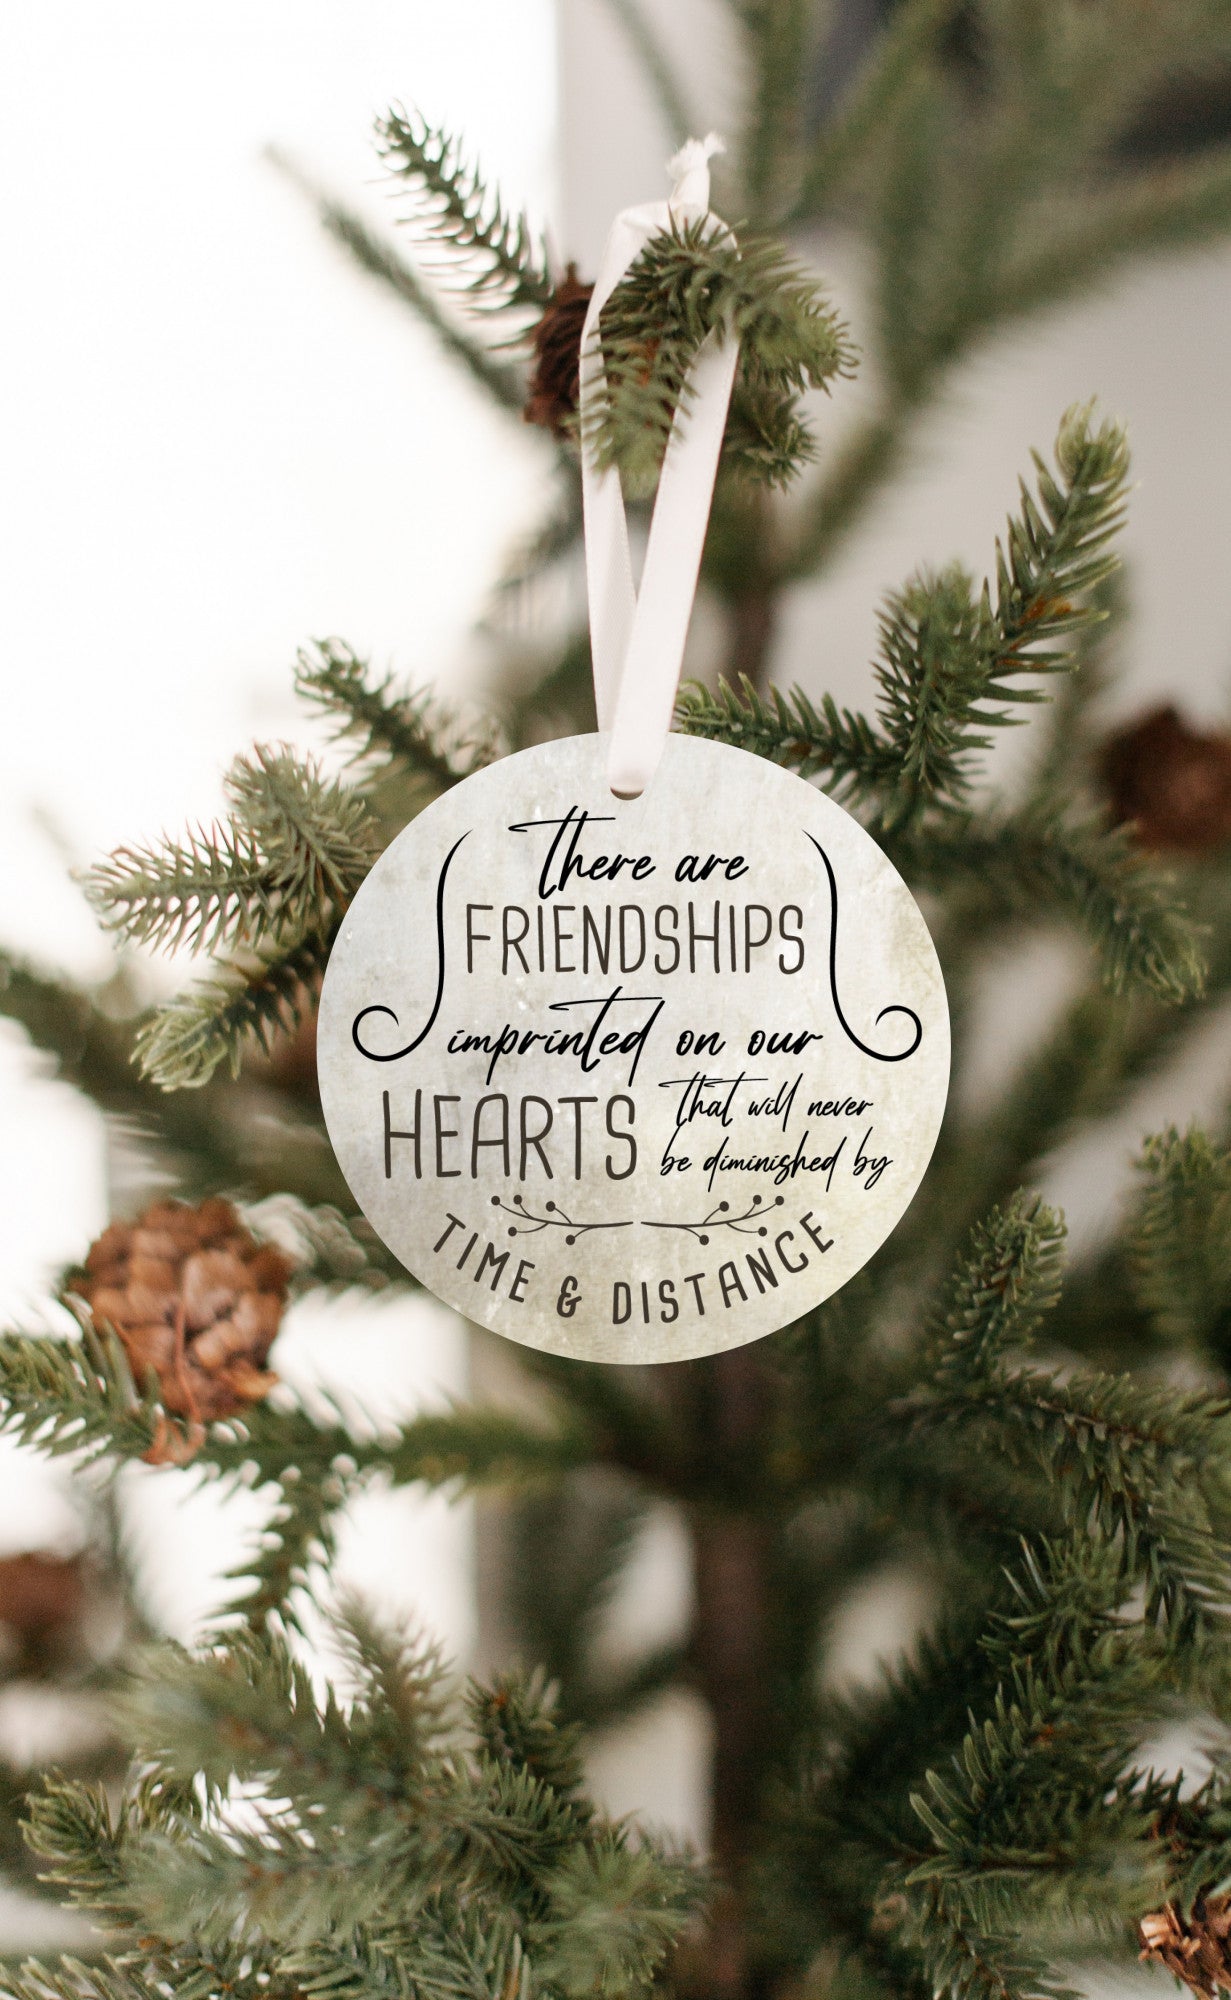 Friends imprinted on our hearts Ornament